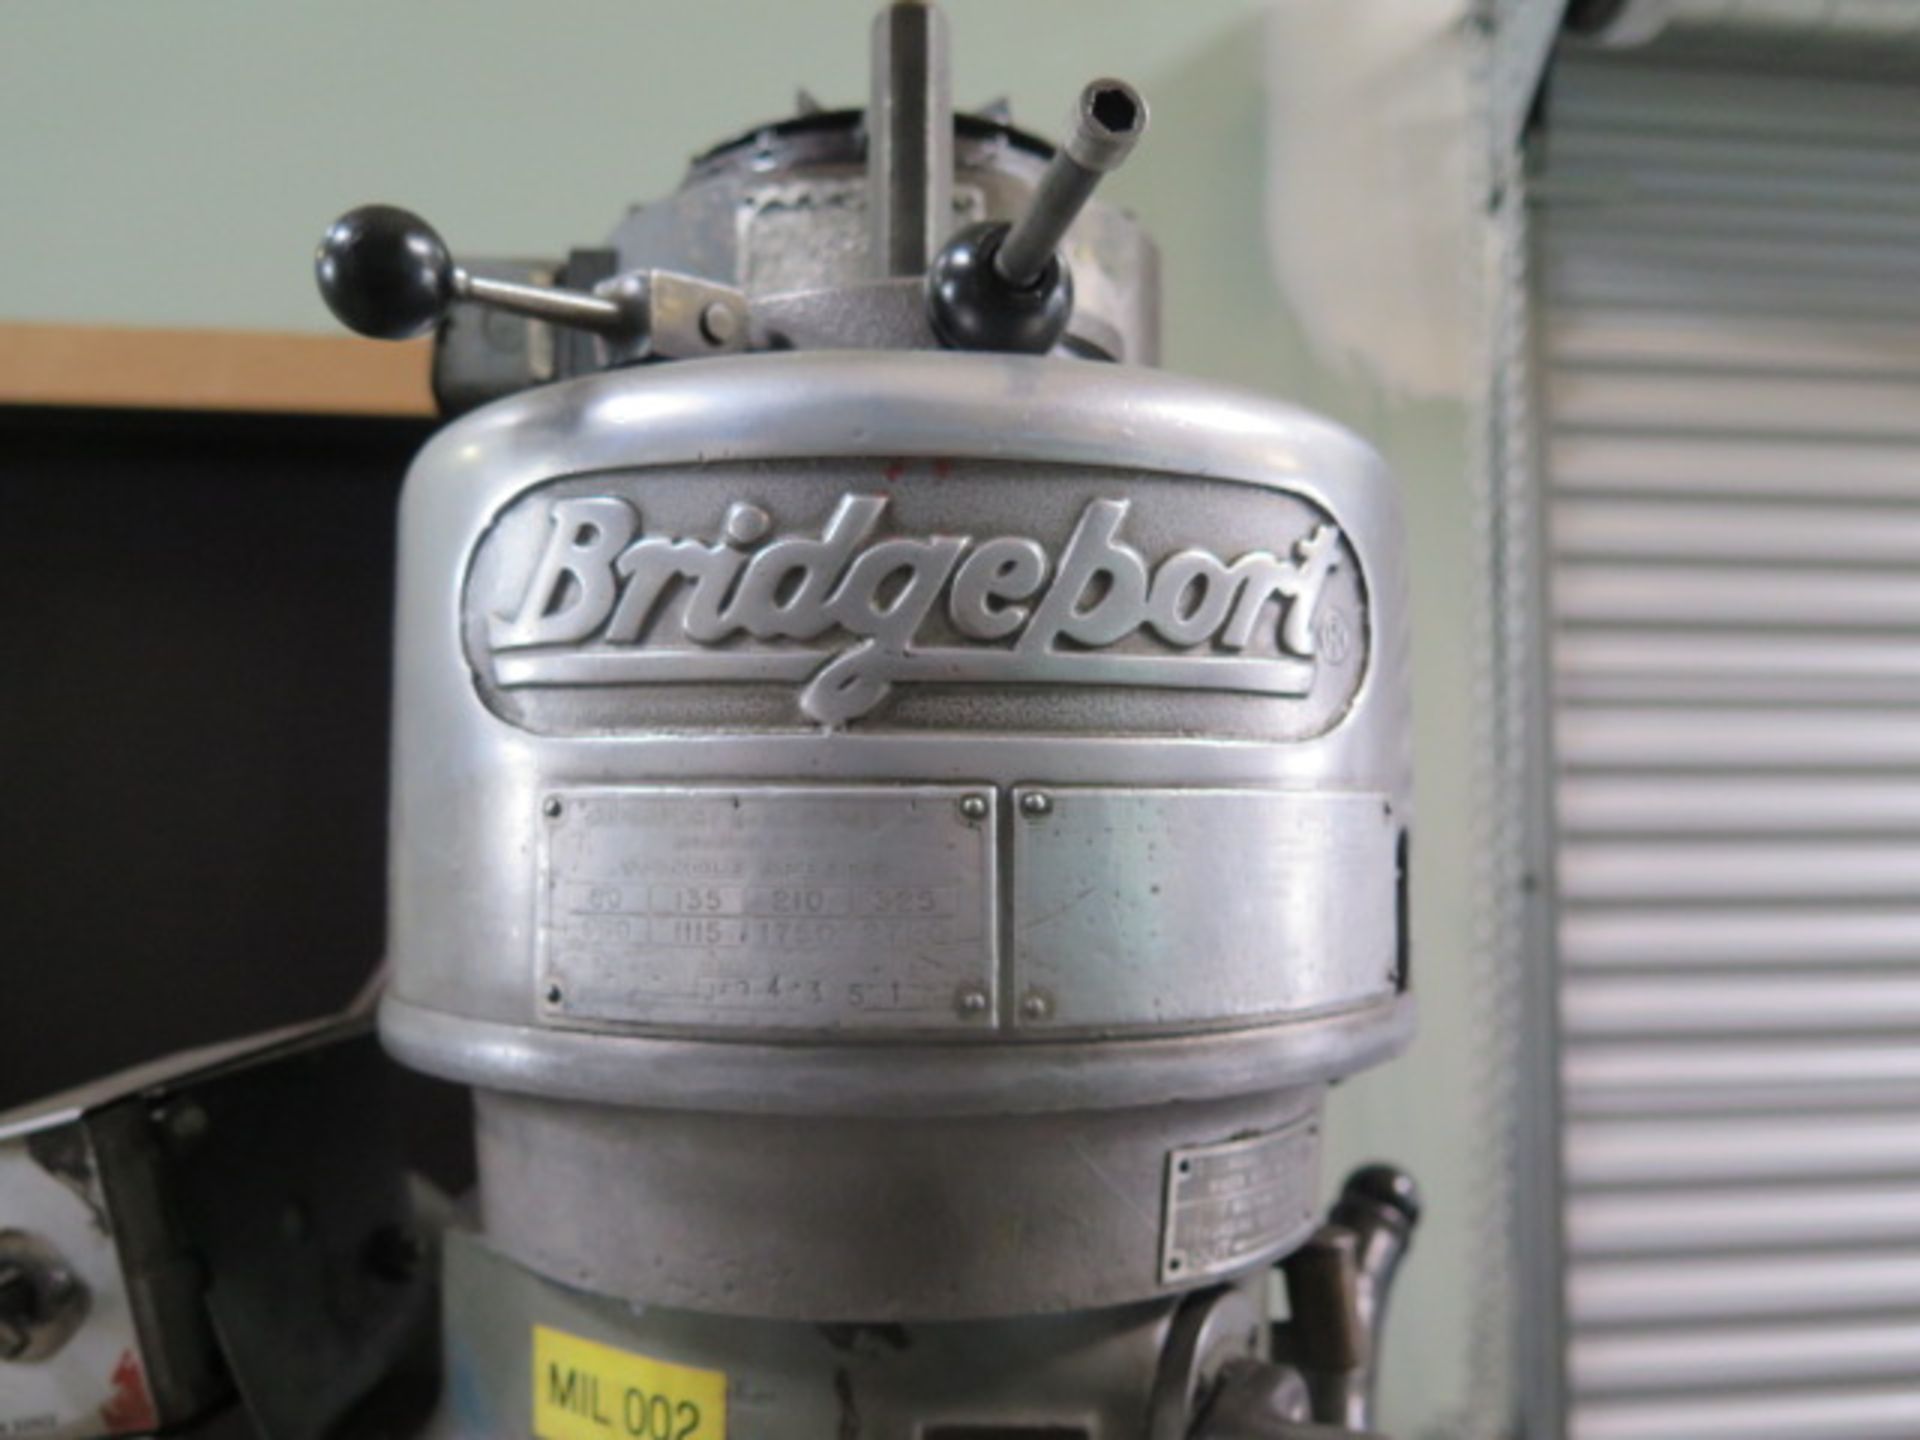 Bridgeport Vertical Mill w/ 1Hp Motor, 80-2720 RPM, 8-Speeds, 11” Riser, 9” x 42” Table SOLD AS IS - Image 11 of 11